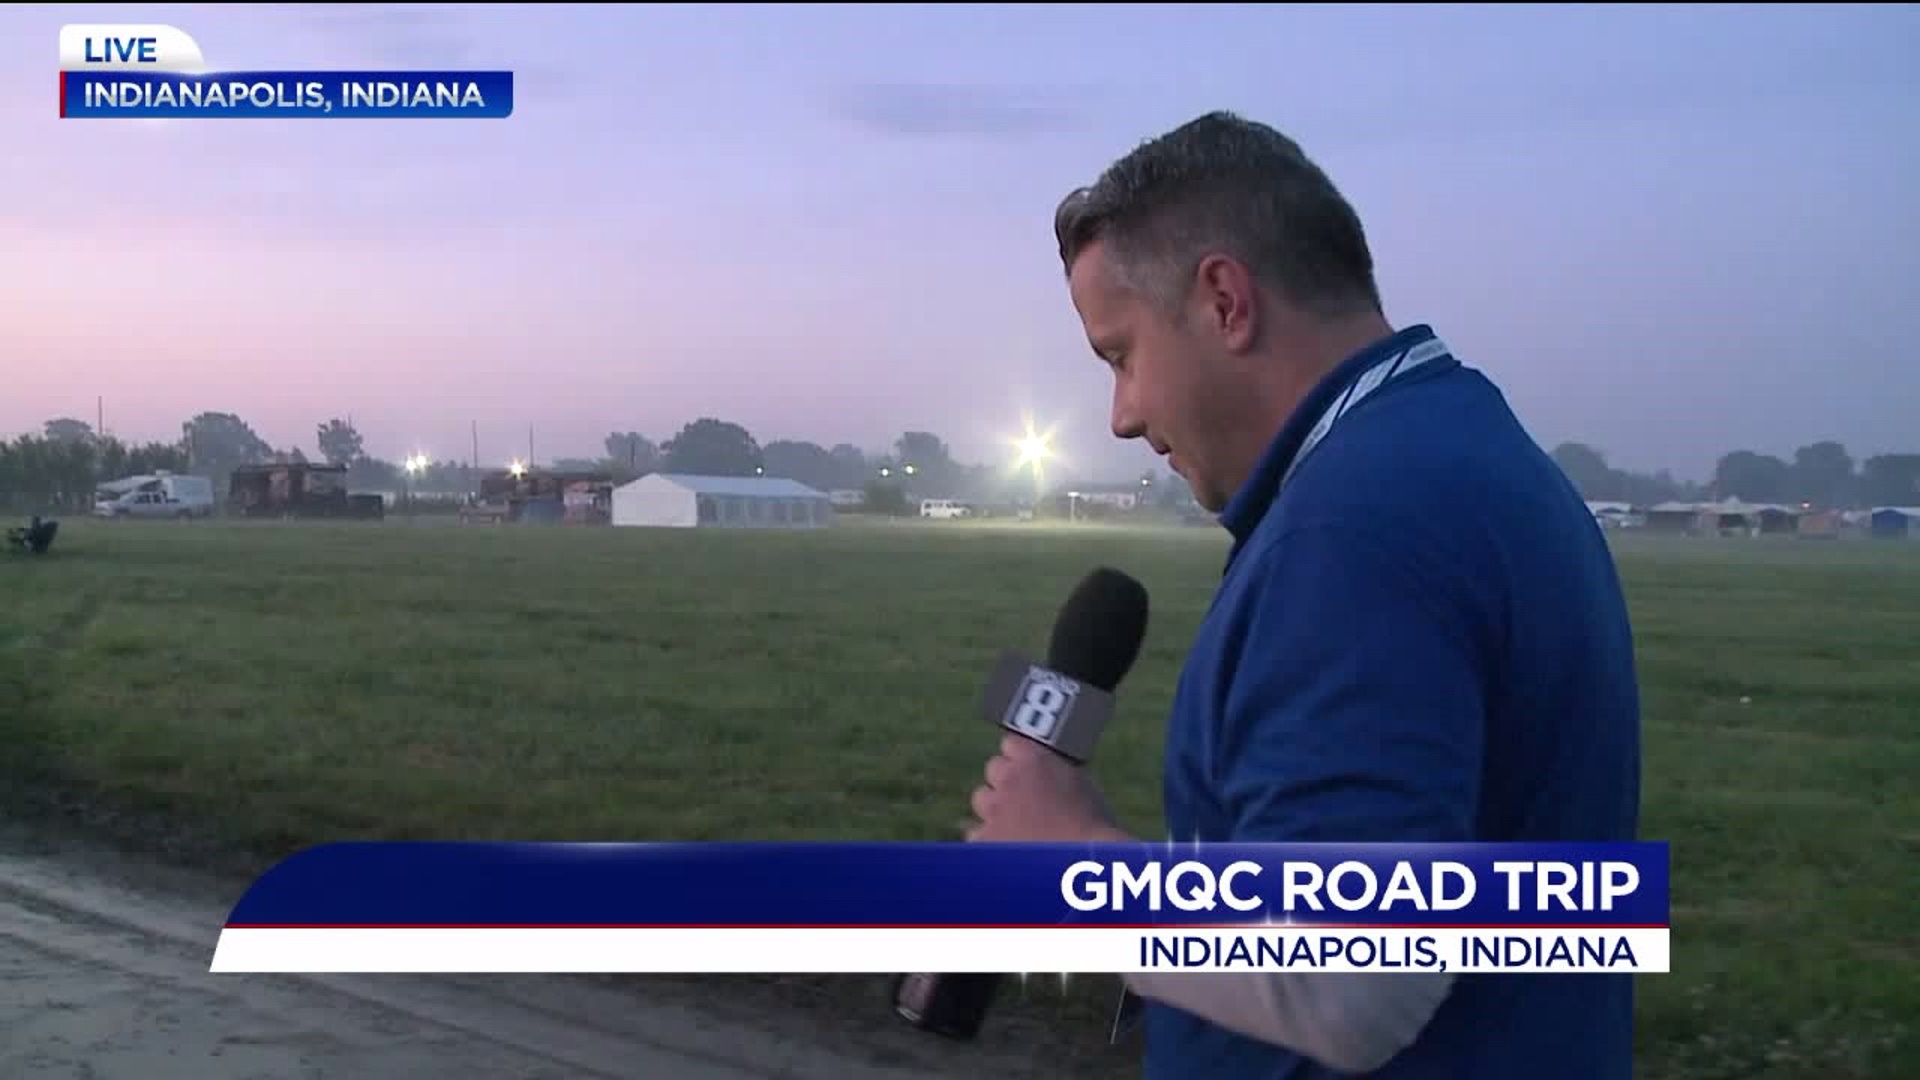 GMQC Road Trip stops in Indiana